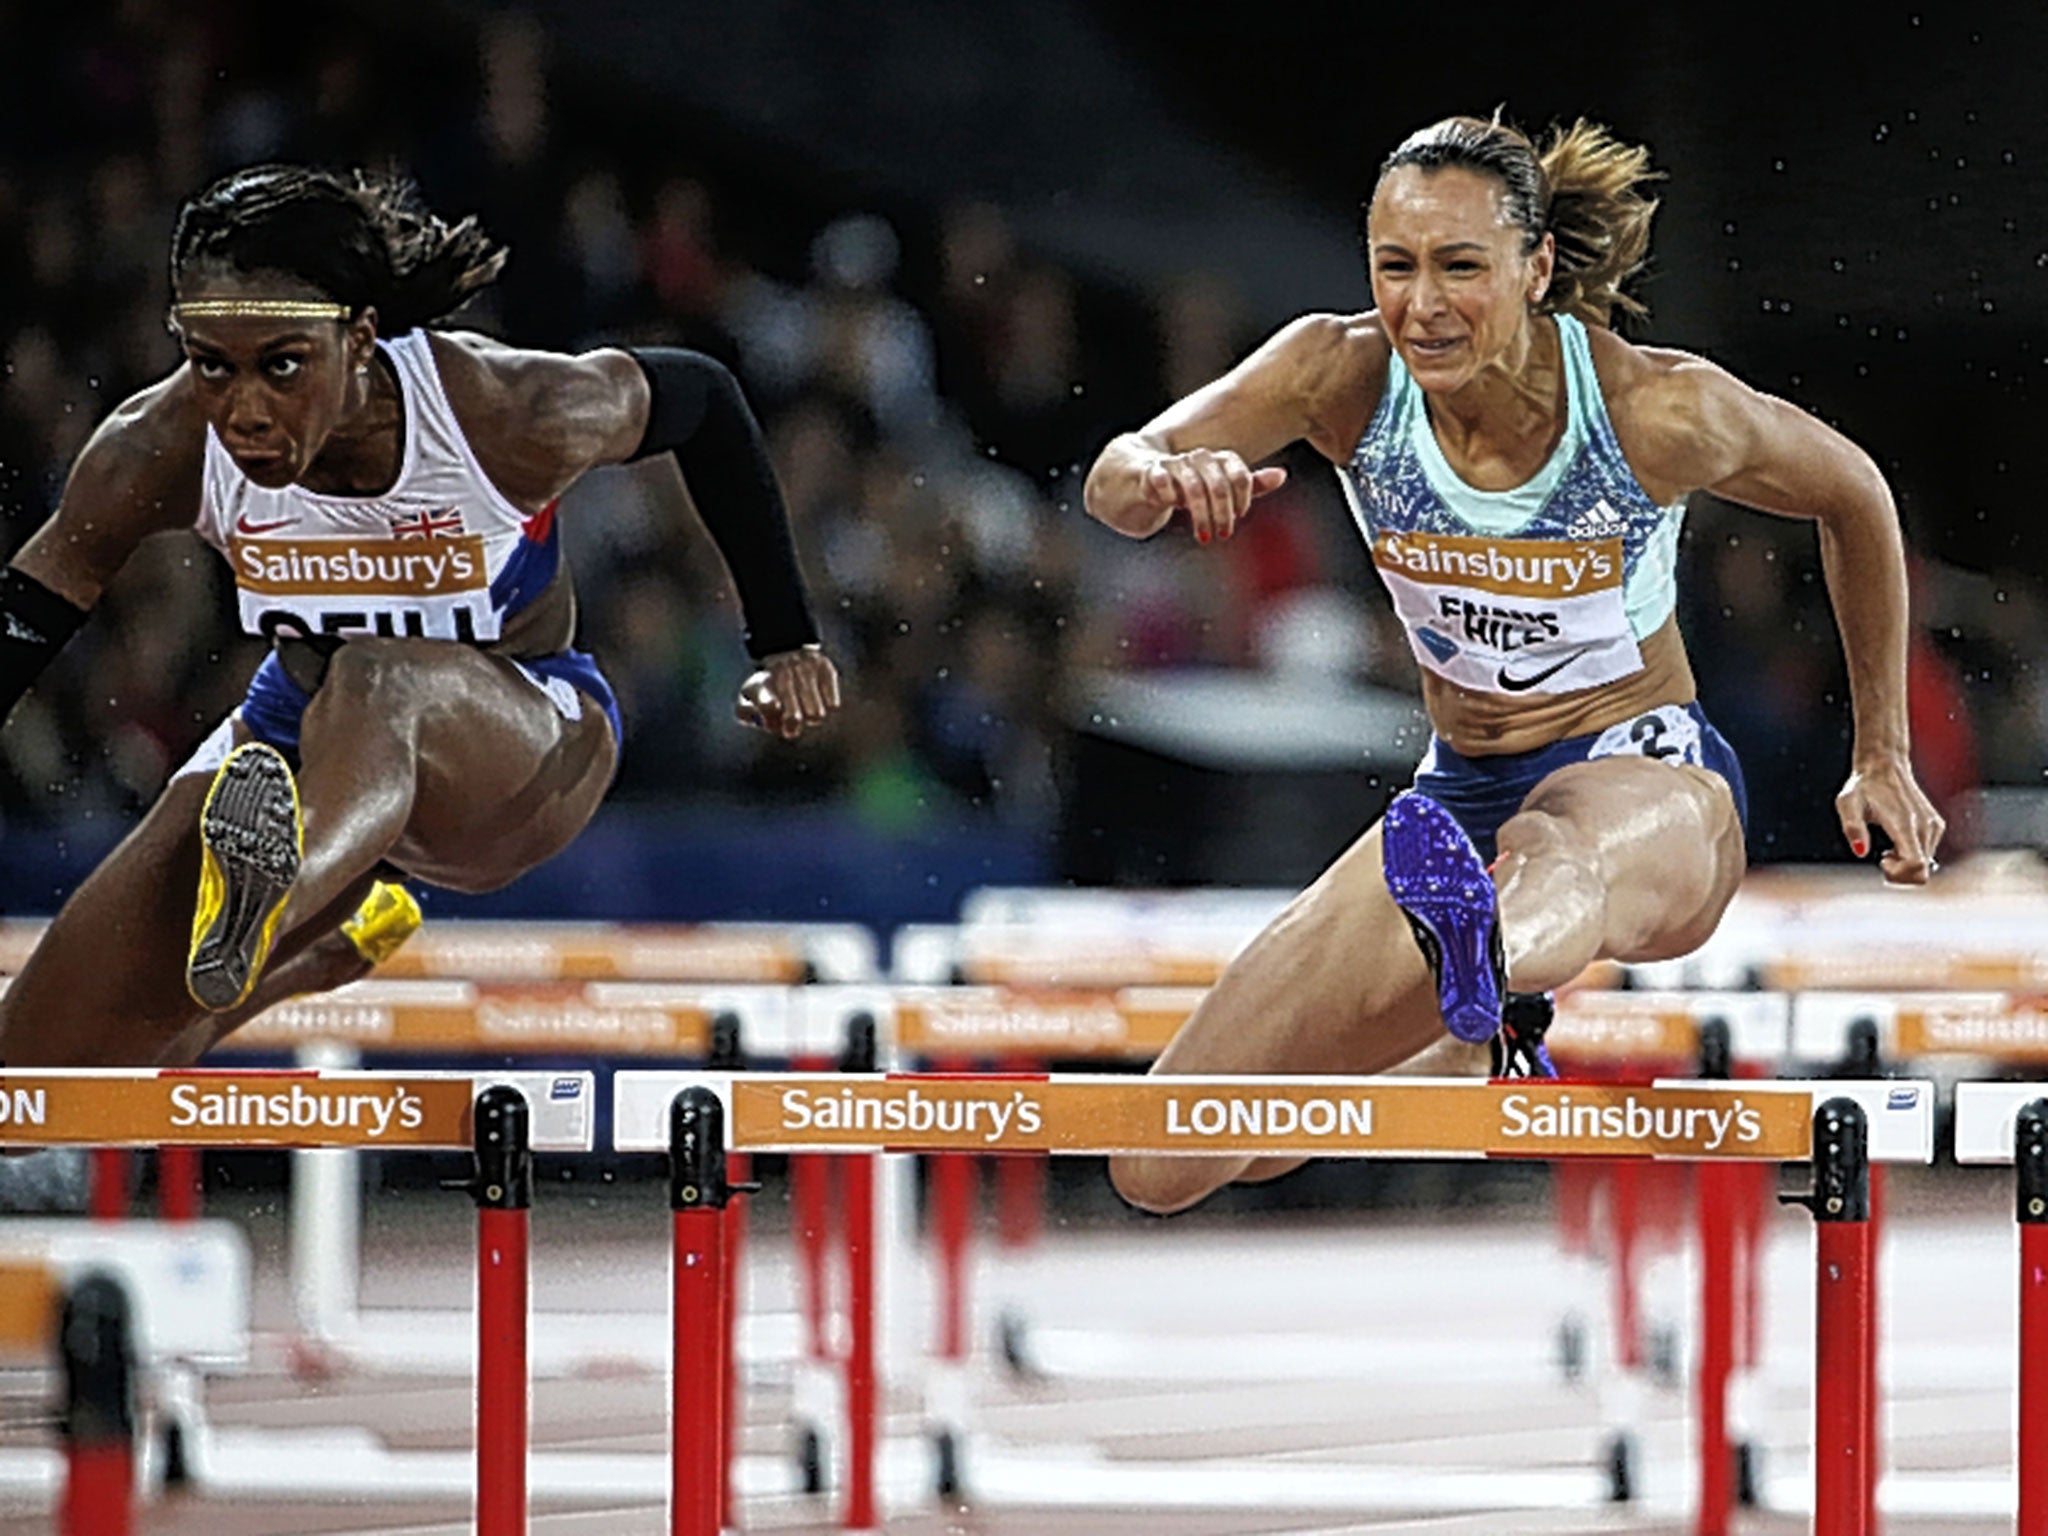 Jessica Ennis-Hill makes light work of the 100m hurdles at the Anniversary Games